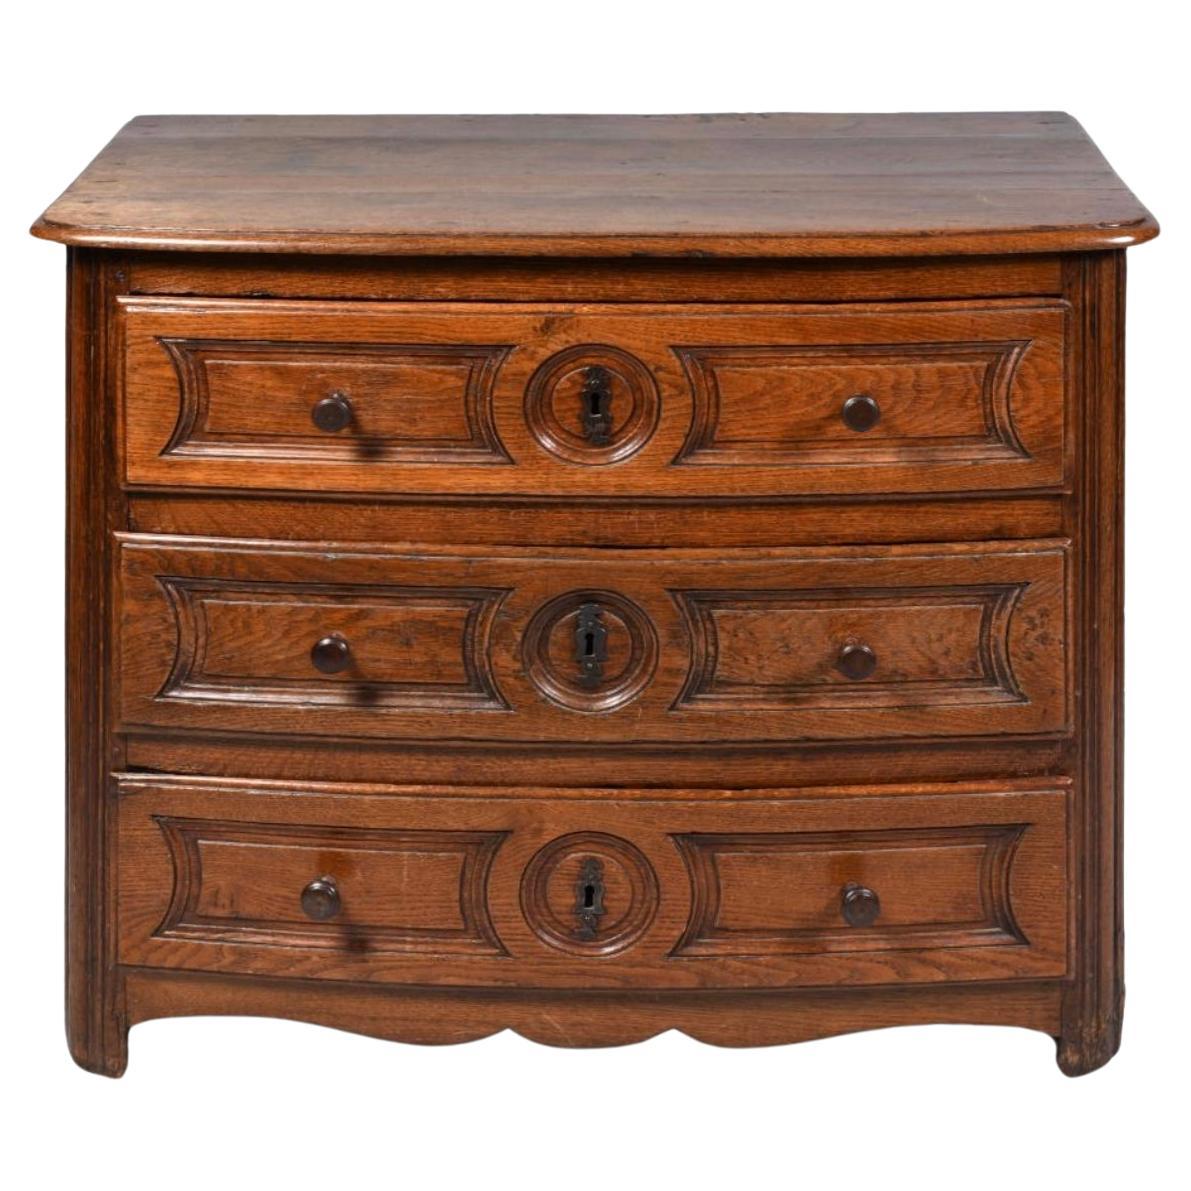 French Provincial Oak Commode, 18th Century